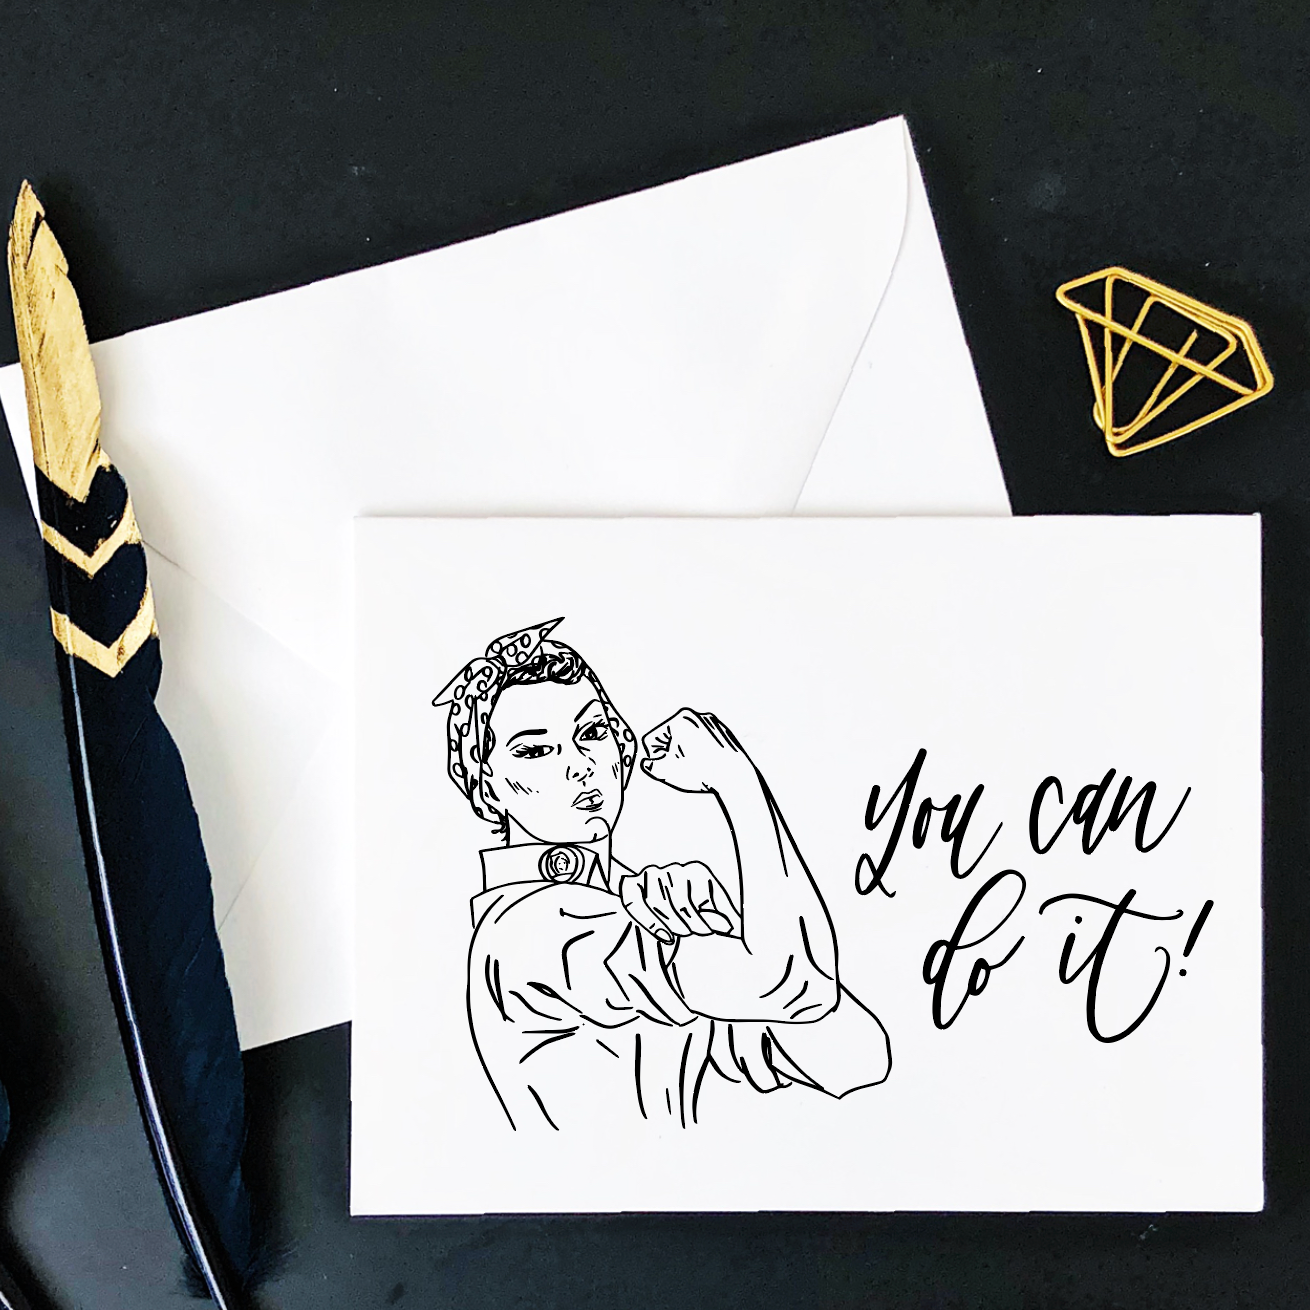 Rosie the Riveter “You Can Do It” Card